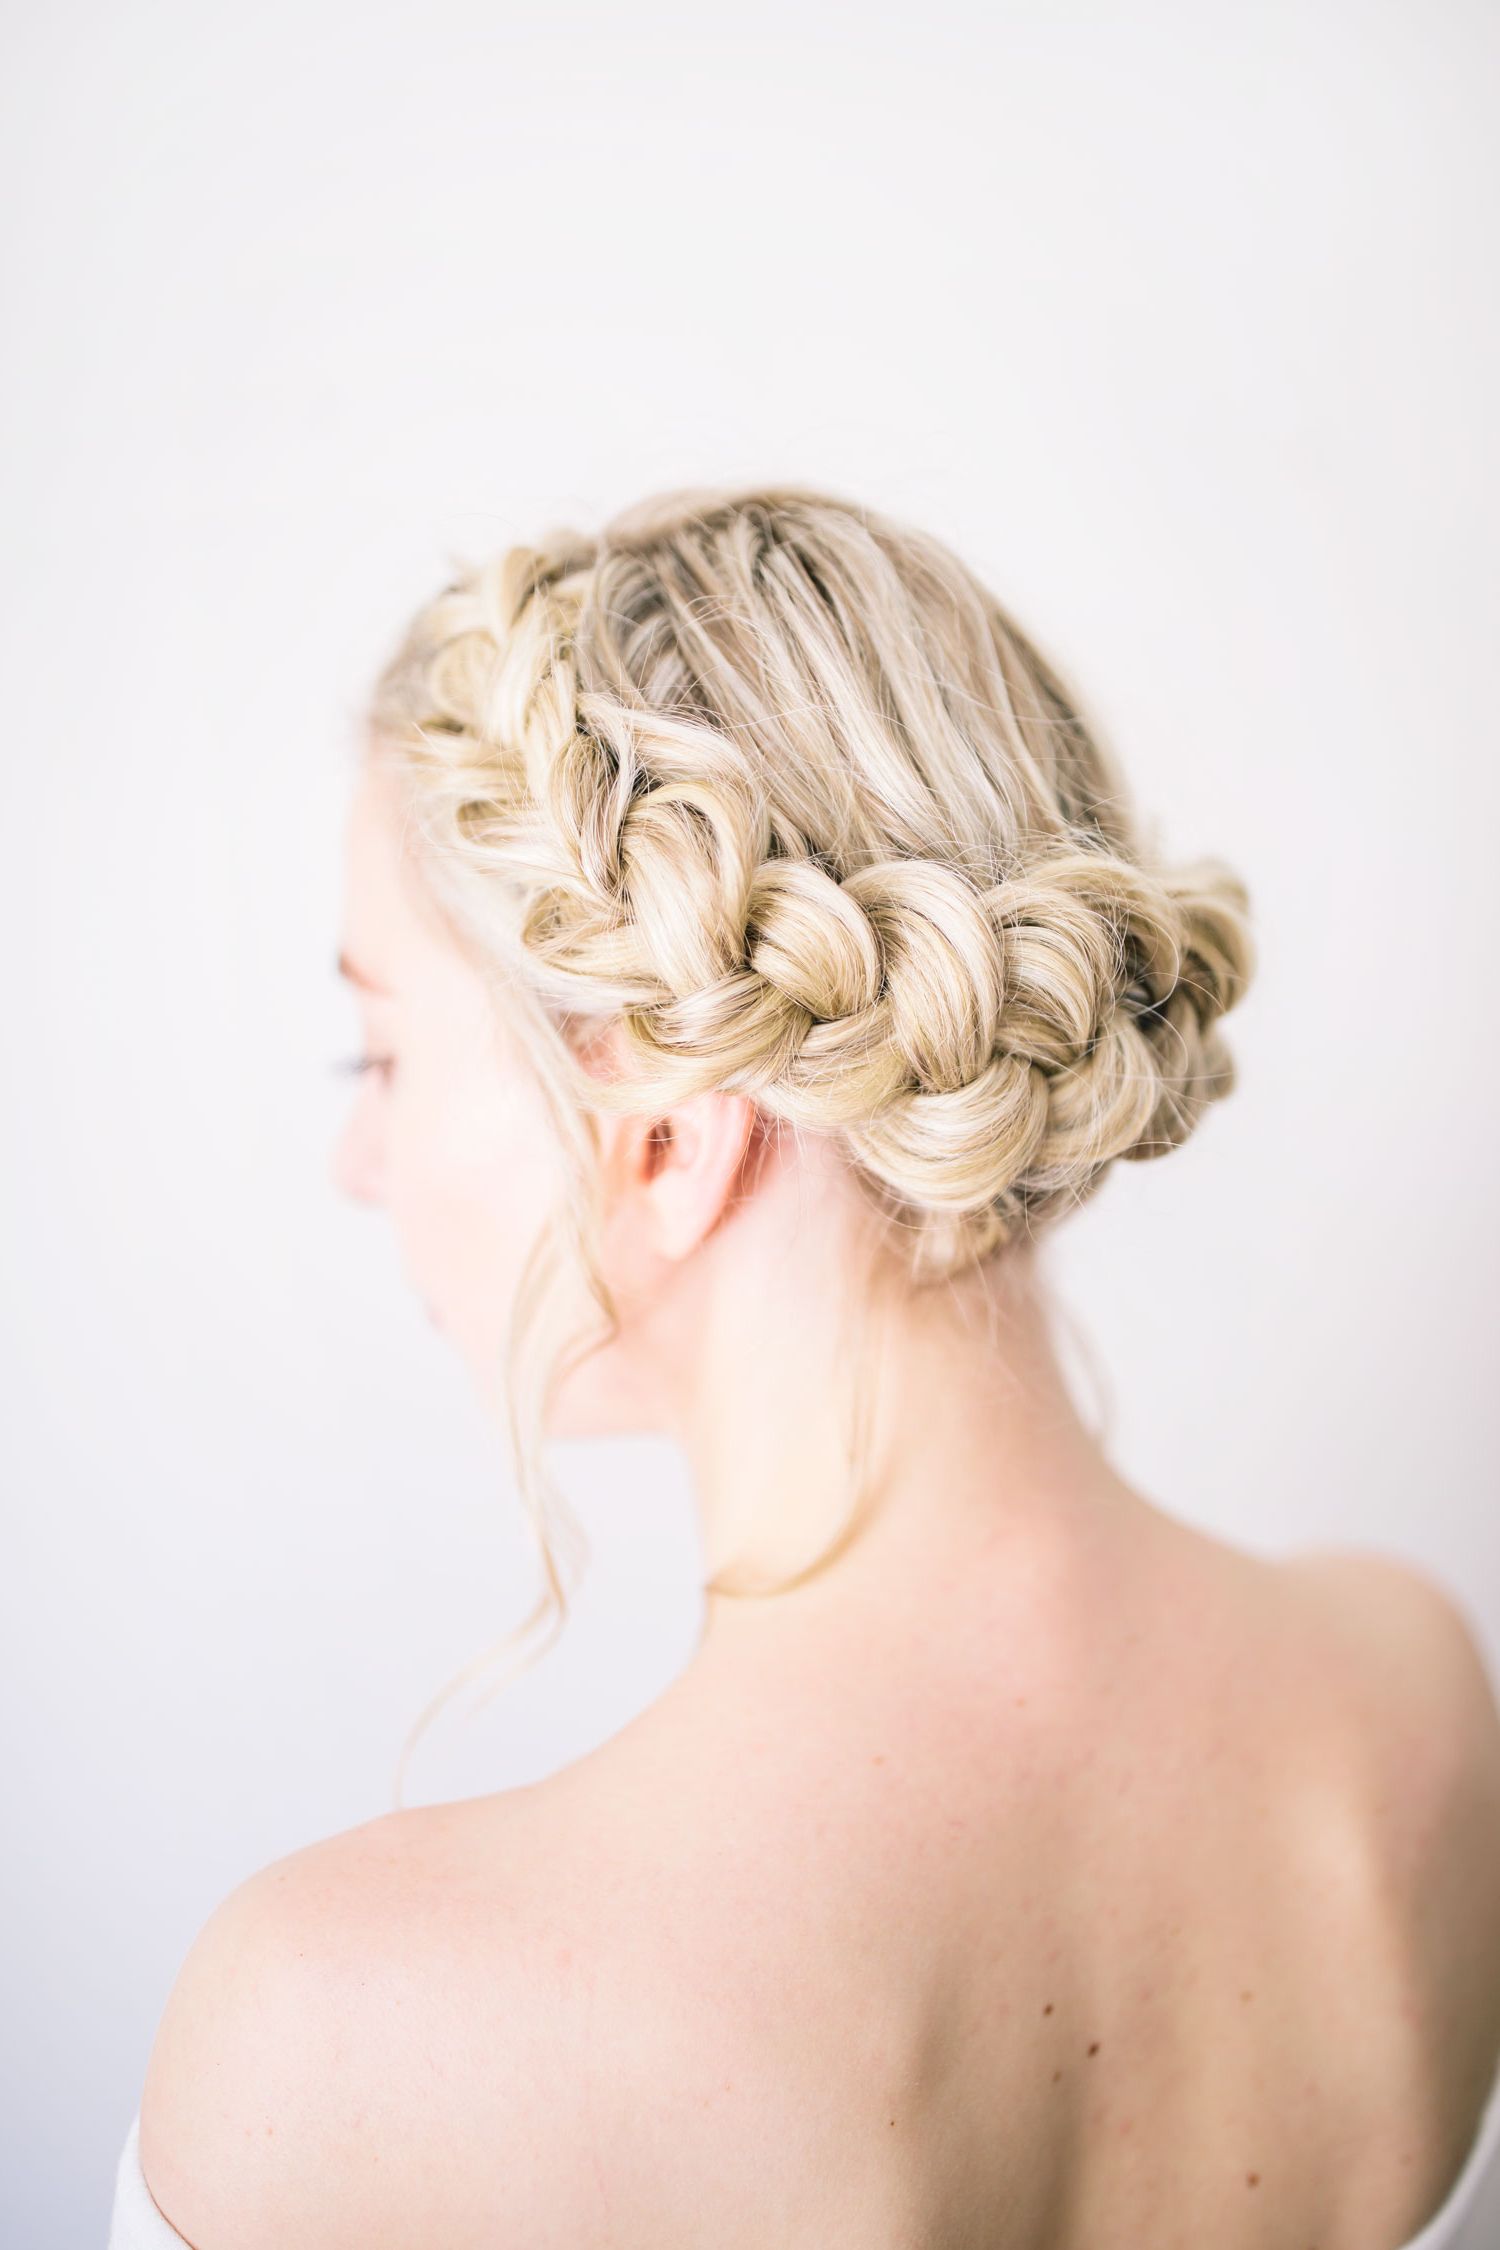 Life With Regard To Fashionable Softly Pulled Back Braid Hairstyles (View 3 of 20)